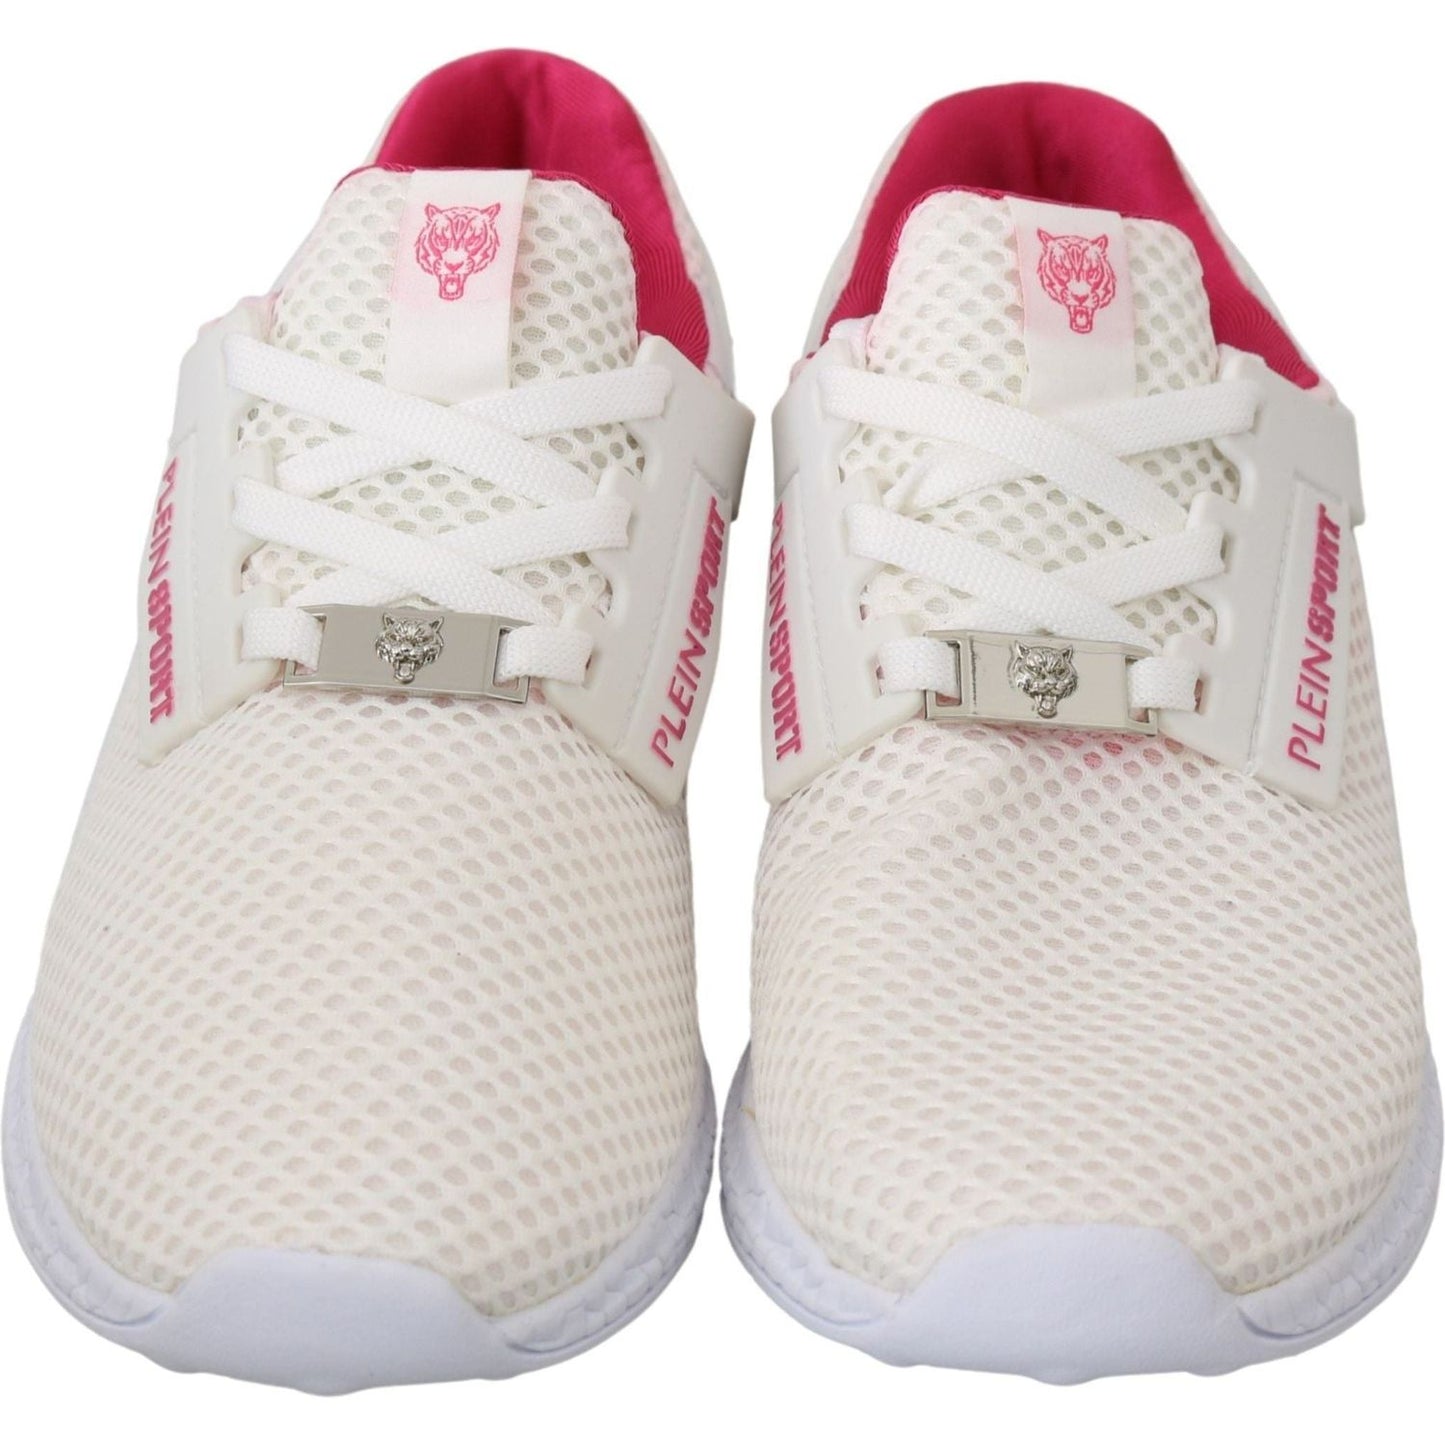 Philipp Plein Chic White Becky Sneakers with Pink Accents WOMAN SNEAKERS white-pink-polyester-becky-sneakers-shoes